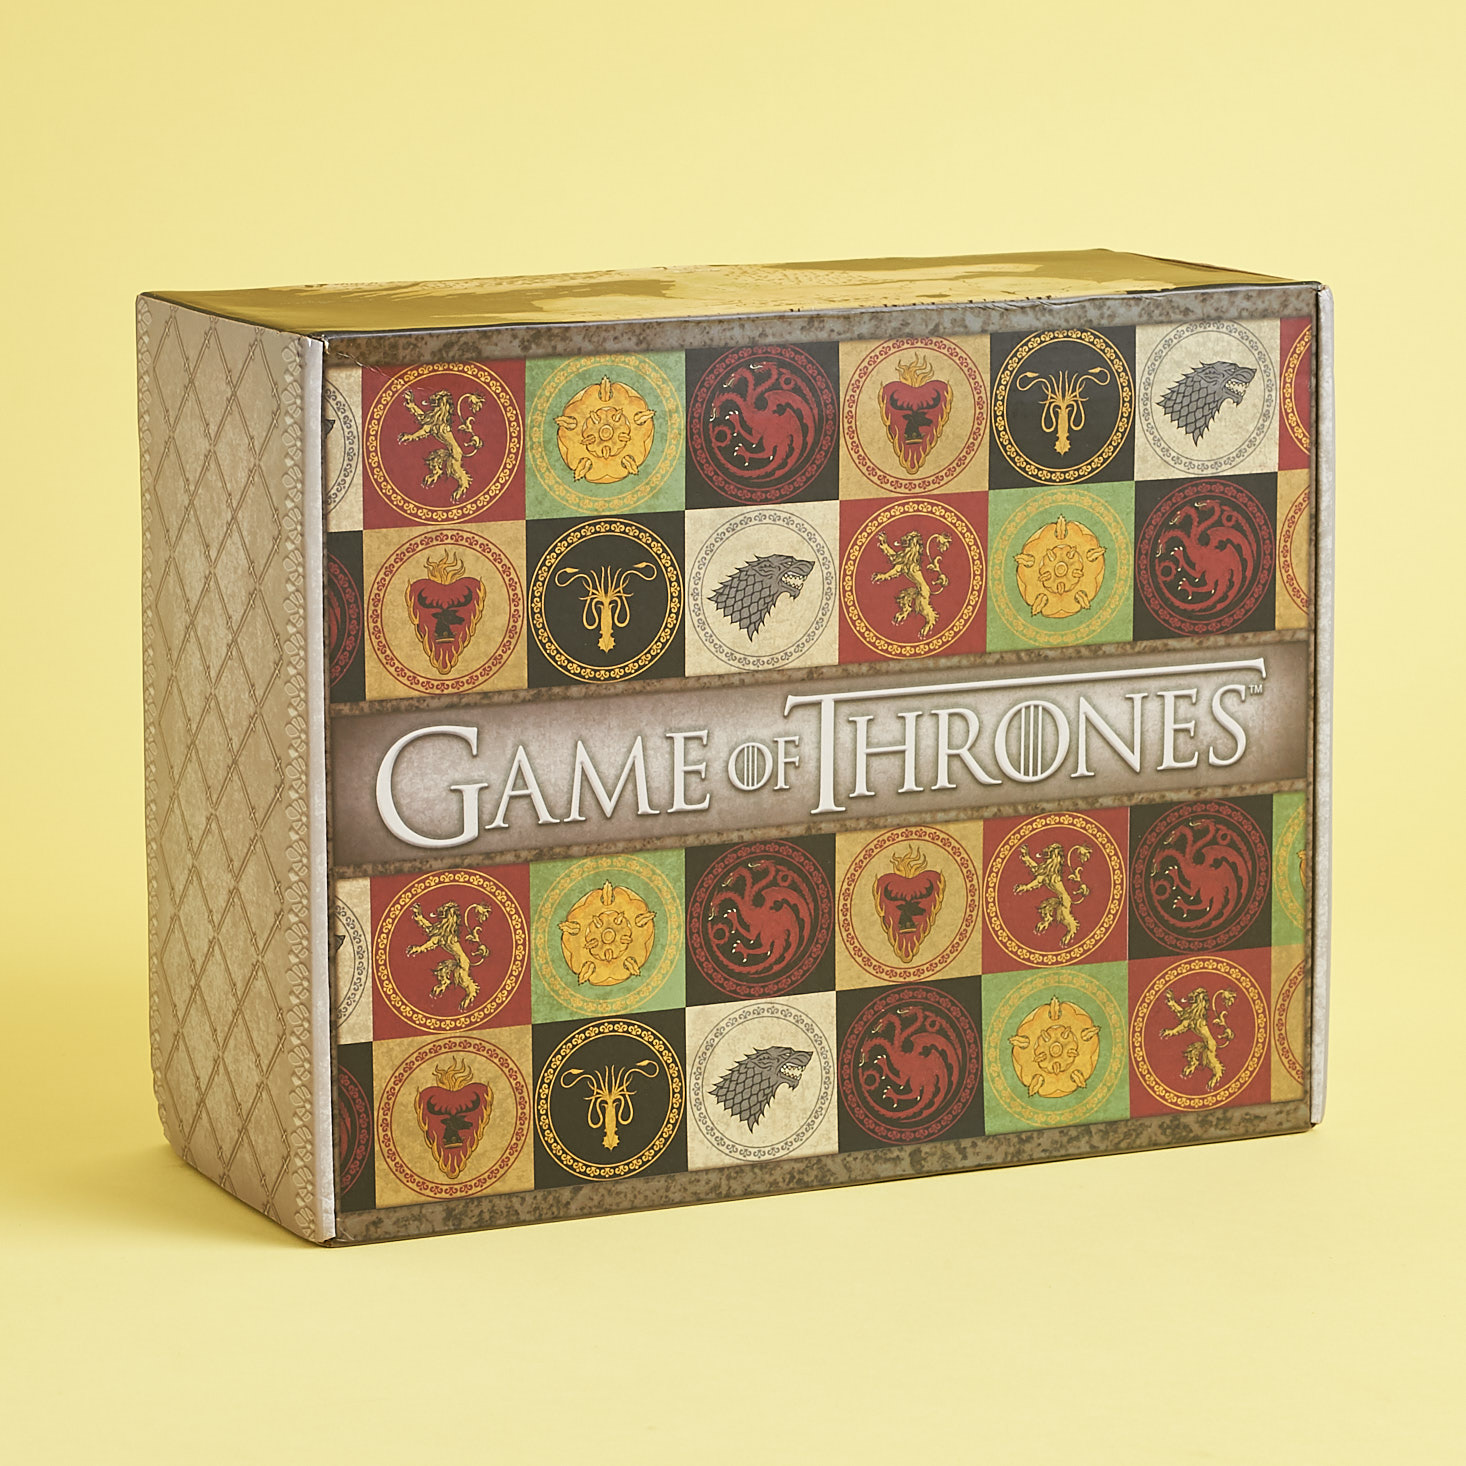 Game of Thrones Box Review: Noble Feast of Westeros – Summer 2018